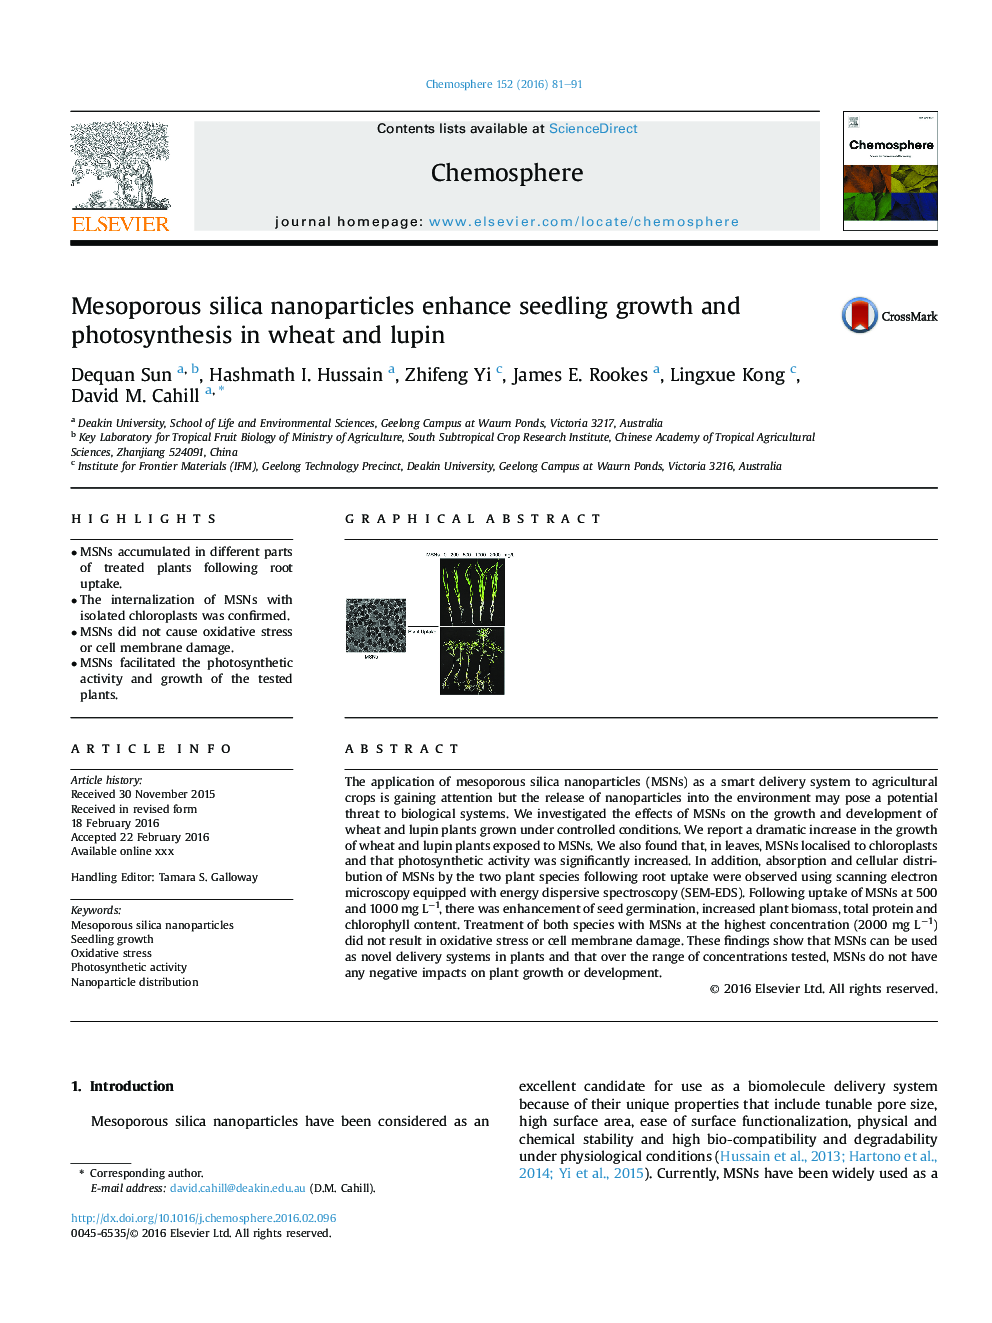 Mesoporous silica nanoparticles enhance seedling growth and photosynthesis in wheat and lupin